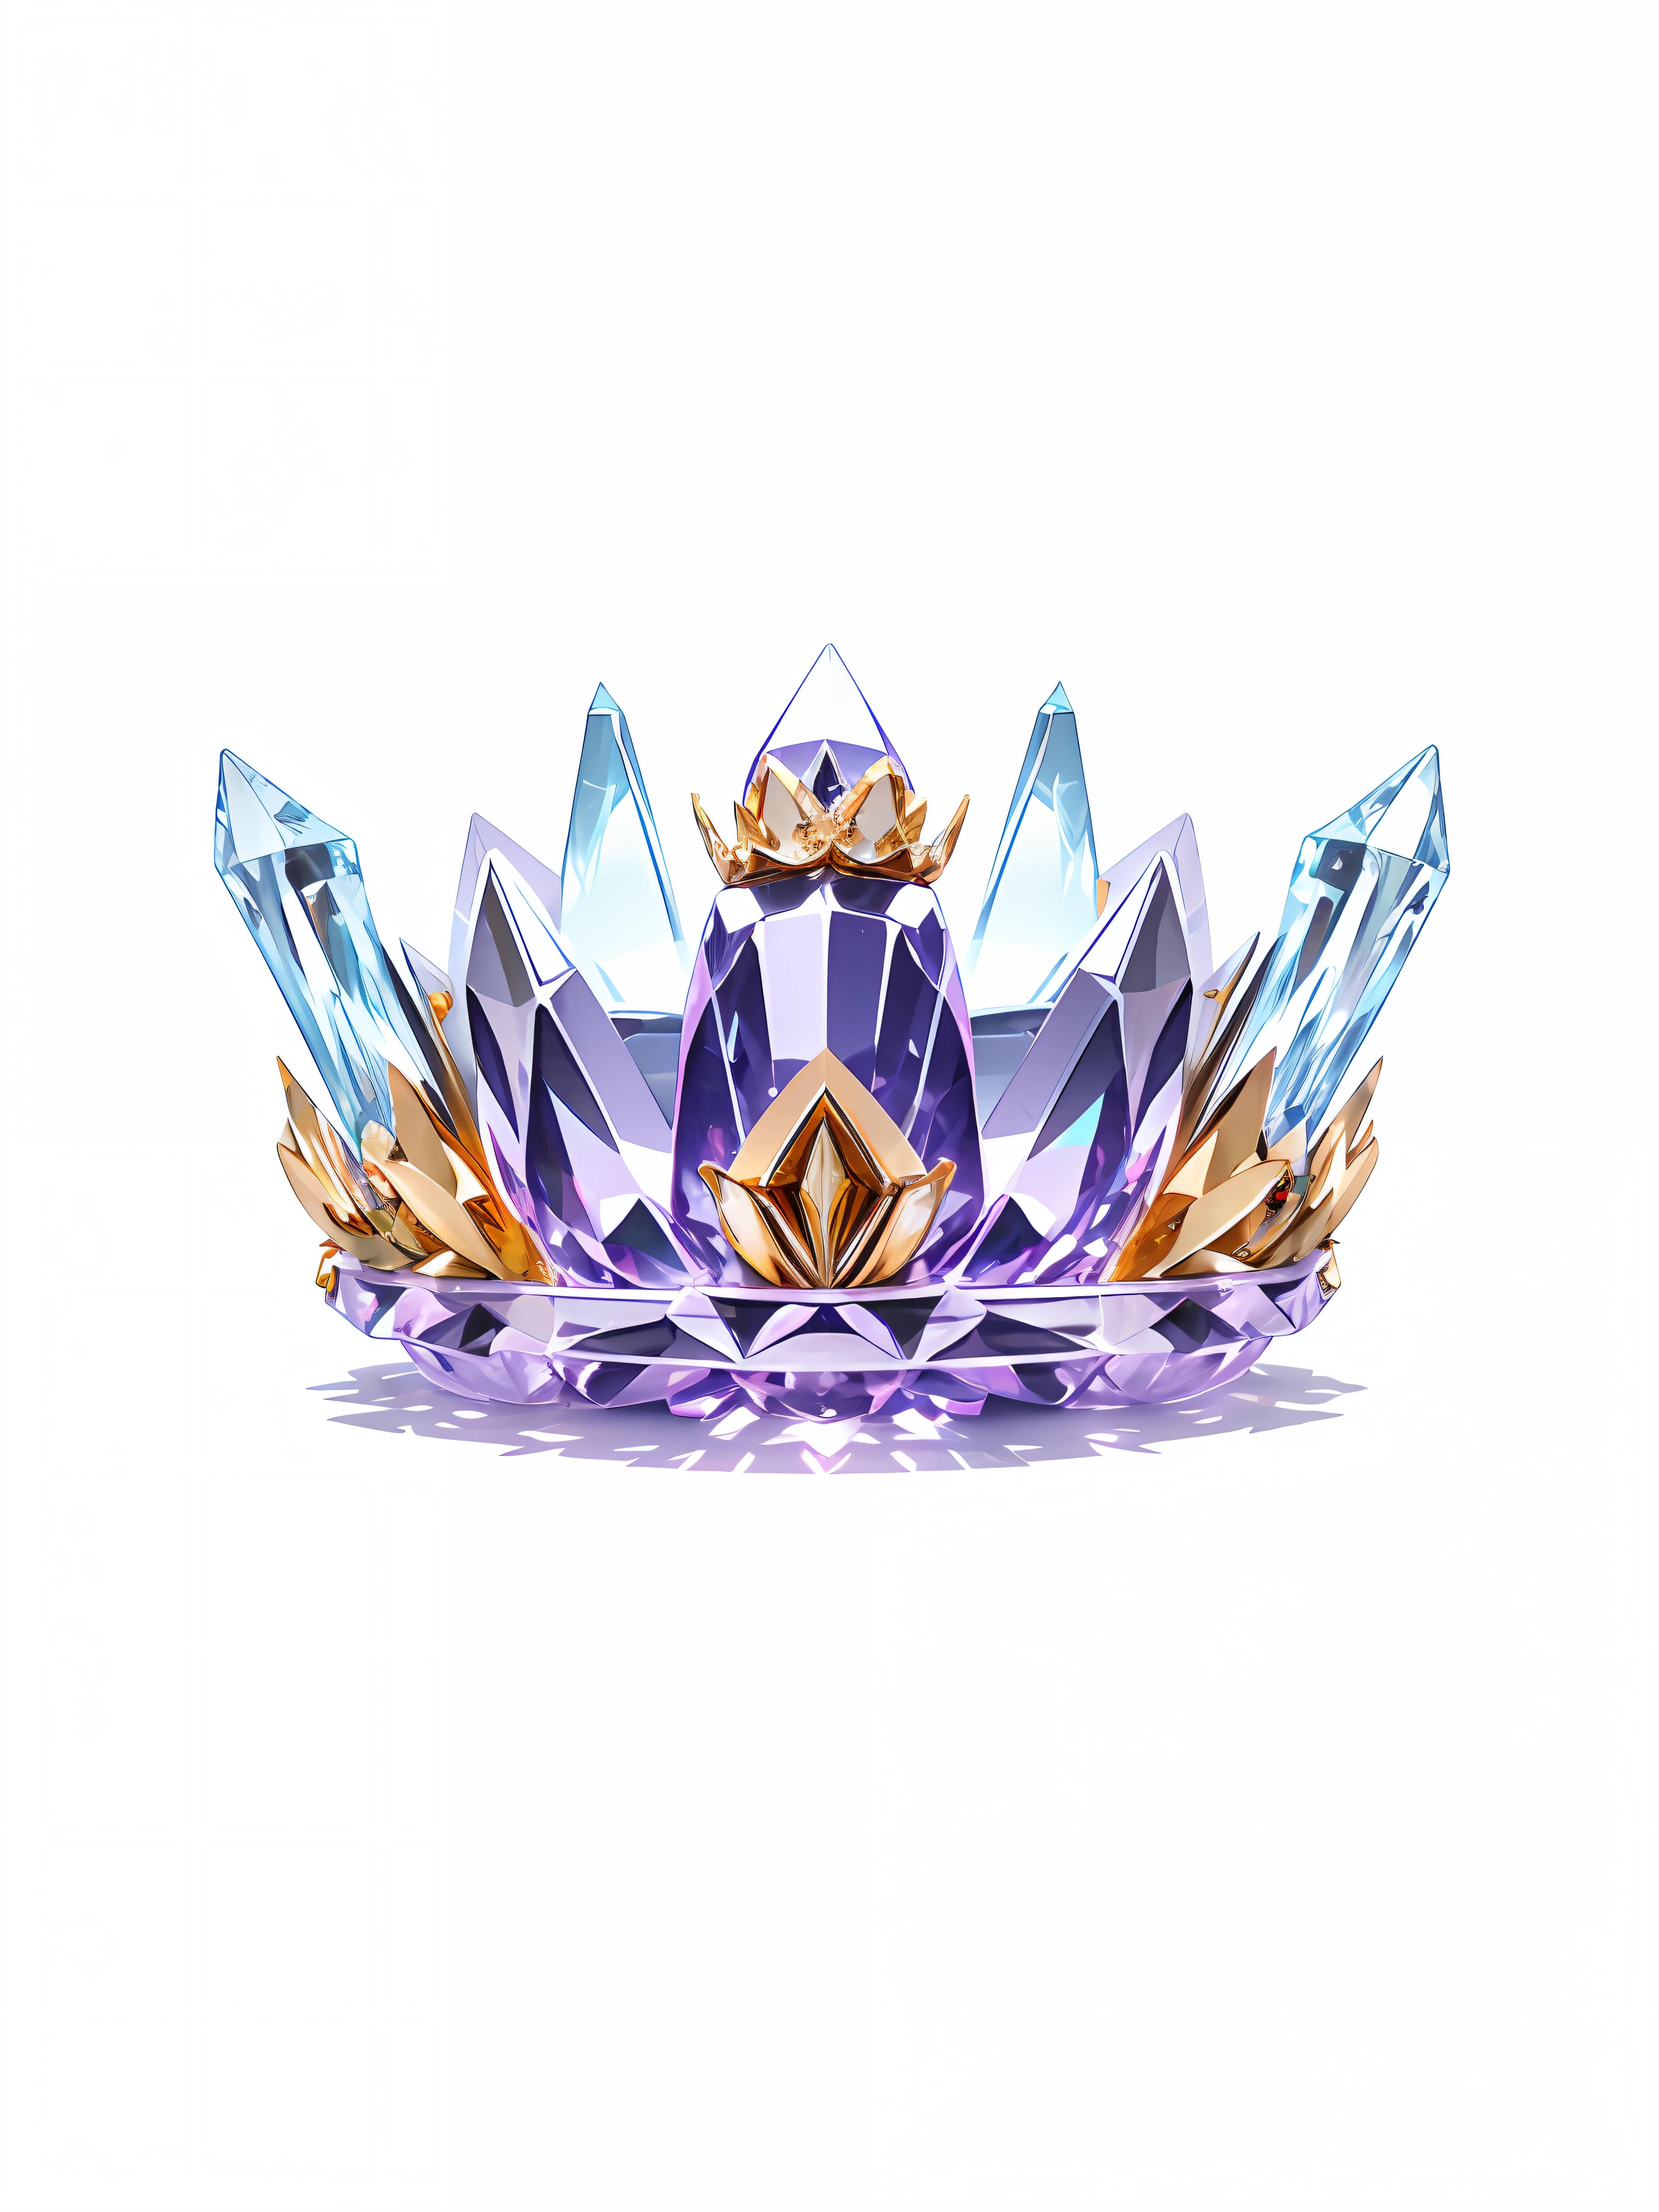 8k, (crown close-up), positive perspective!! , with a gold + diamond crown on a white background, diamond wings!! ,((((Game Crown)))),((Gold + Diamond Crown)),((Left and Right Symmetrical Crown)),((Streamlined Crown)))),(Slender Crown))),Gorgeous, Colorful, Complex Diamonds, Ultra Realistic Fantasy Crown, Crystal Crown, White Laser Crown, Crystal Corolla, Floating Crown, (Ray Tracing), (Clean Background)), Crown, Flower Corolla, Crown, Giant Diamond Crown, Diamond Headgear, Amazing Flower Corolla, Diamond Crown --auto --s2